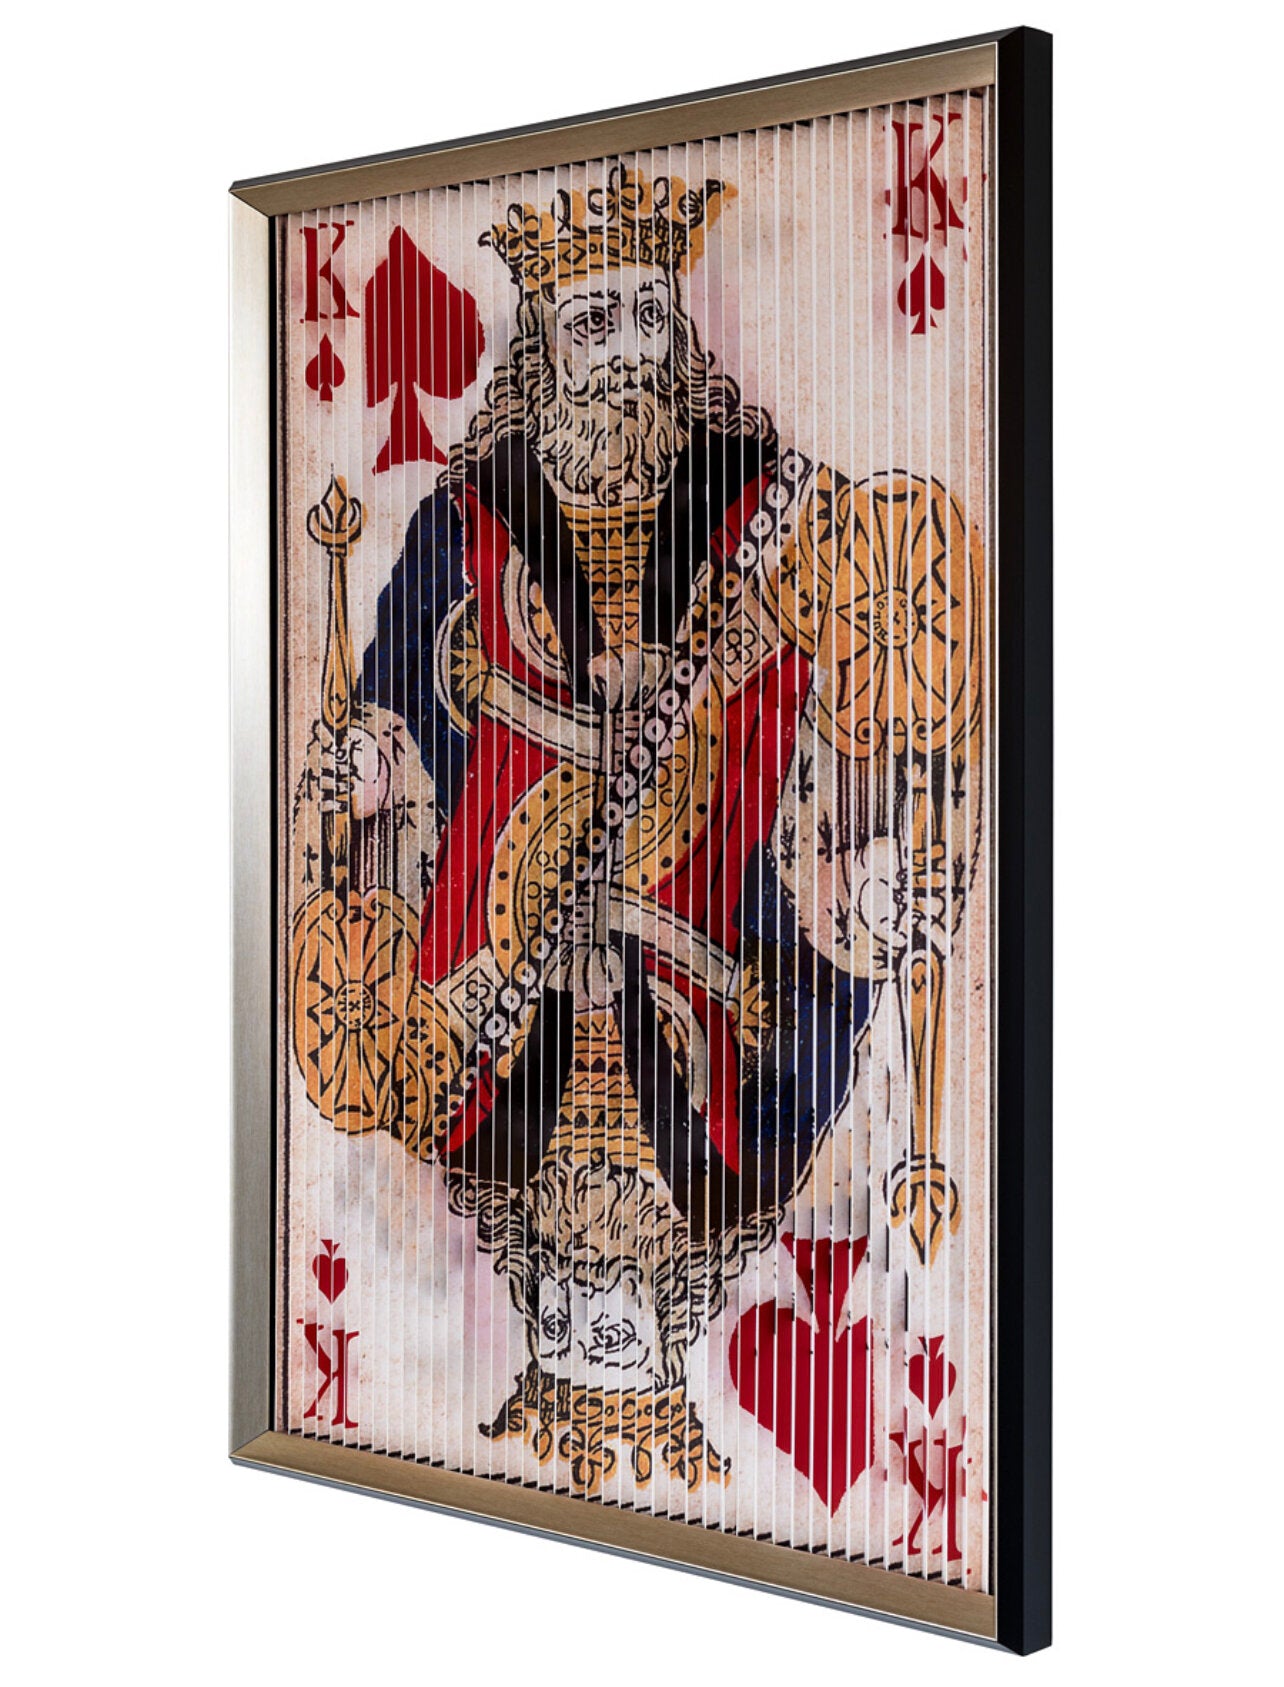 KINETIC ART PICTURE PLAYING CARD